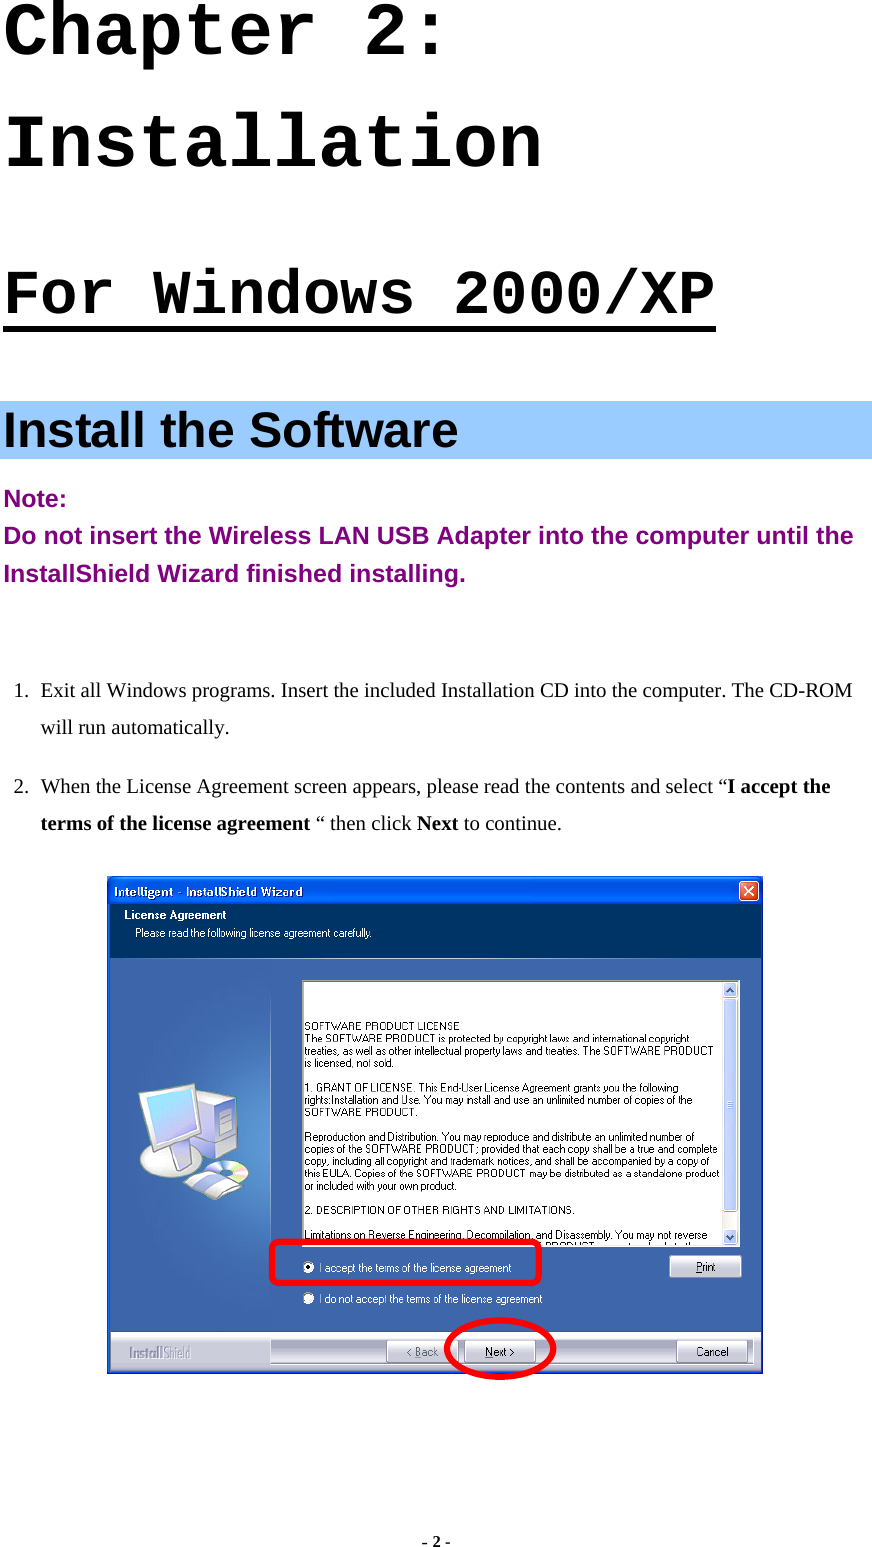  - 2 - Chapter 2: Installation  For Windows 2000/XP  Install the Software Note:  Do not insert the Wireless LAN USB Adapter into the computer until the InstallShield Wizard finished installing.  1.  Exit all Windows programs. Insert the included Installation CD into the computer. The CD-ROM will run automatically. 2.  When the License Agreement screen appears, please read the contents and select “I accept the terms of the license agreement “ then click Next to continue.  